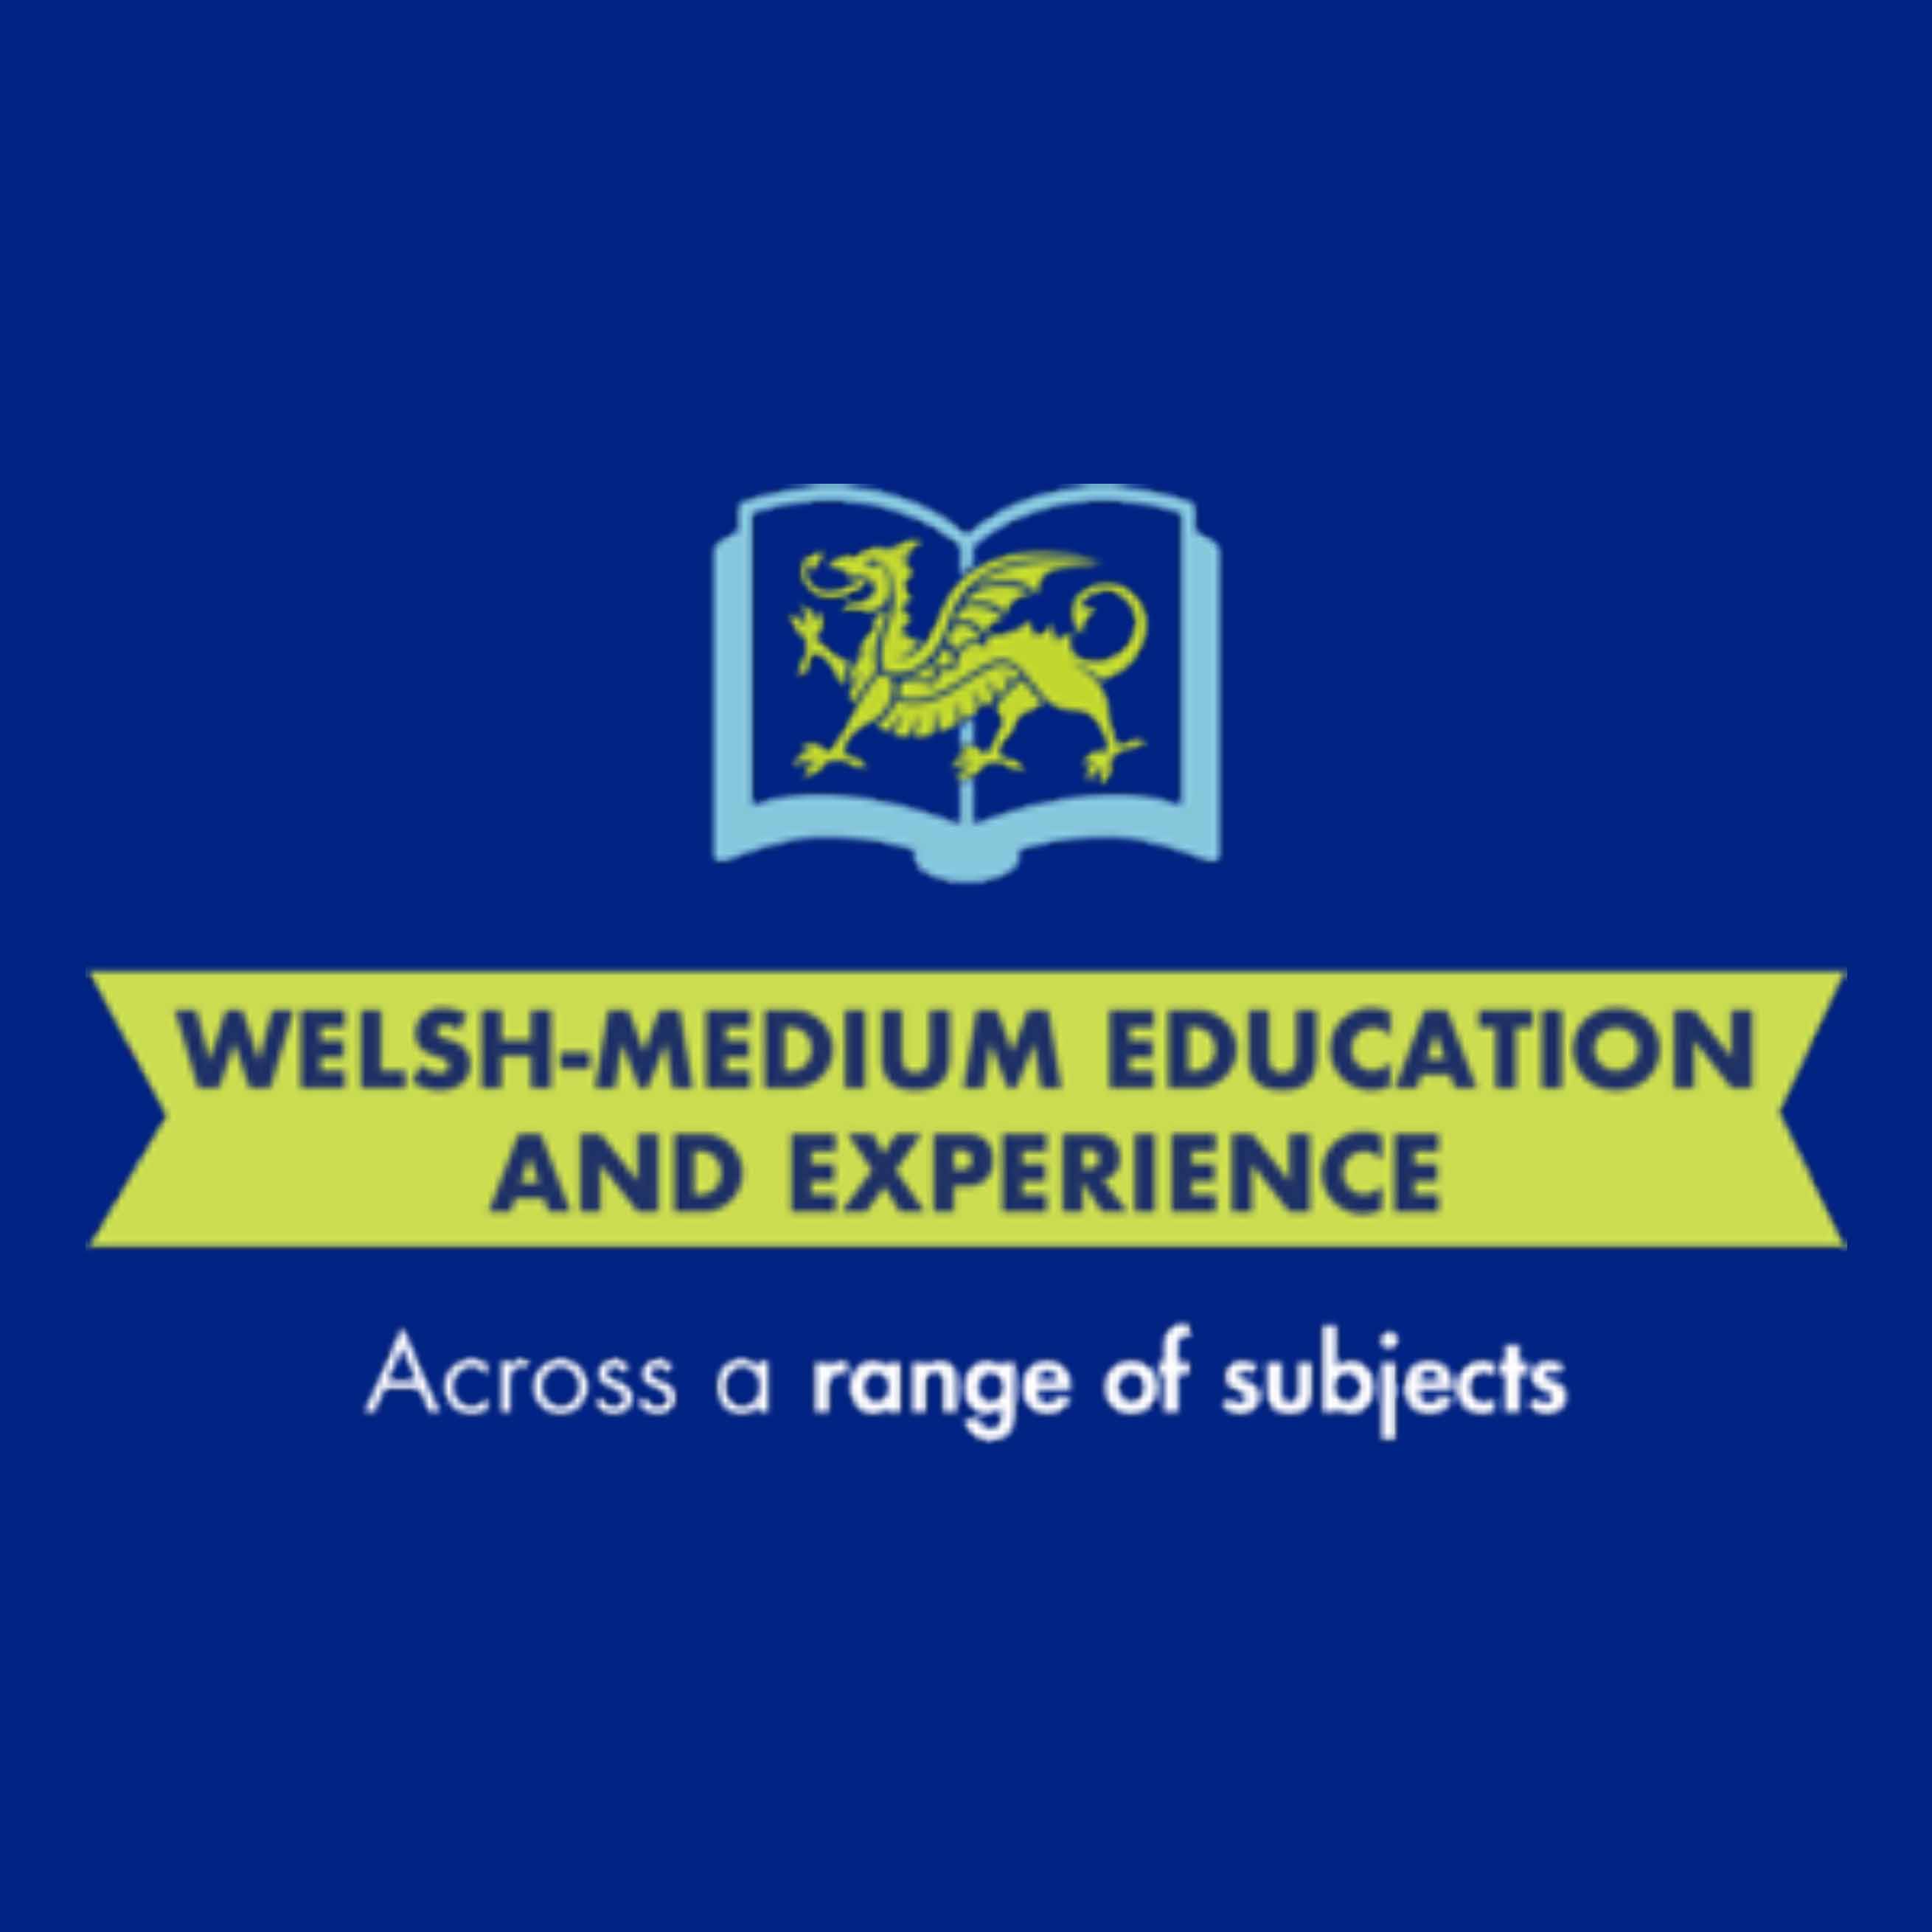 Welsh-medium education and experience across a range of subjects